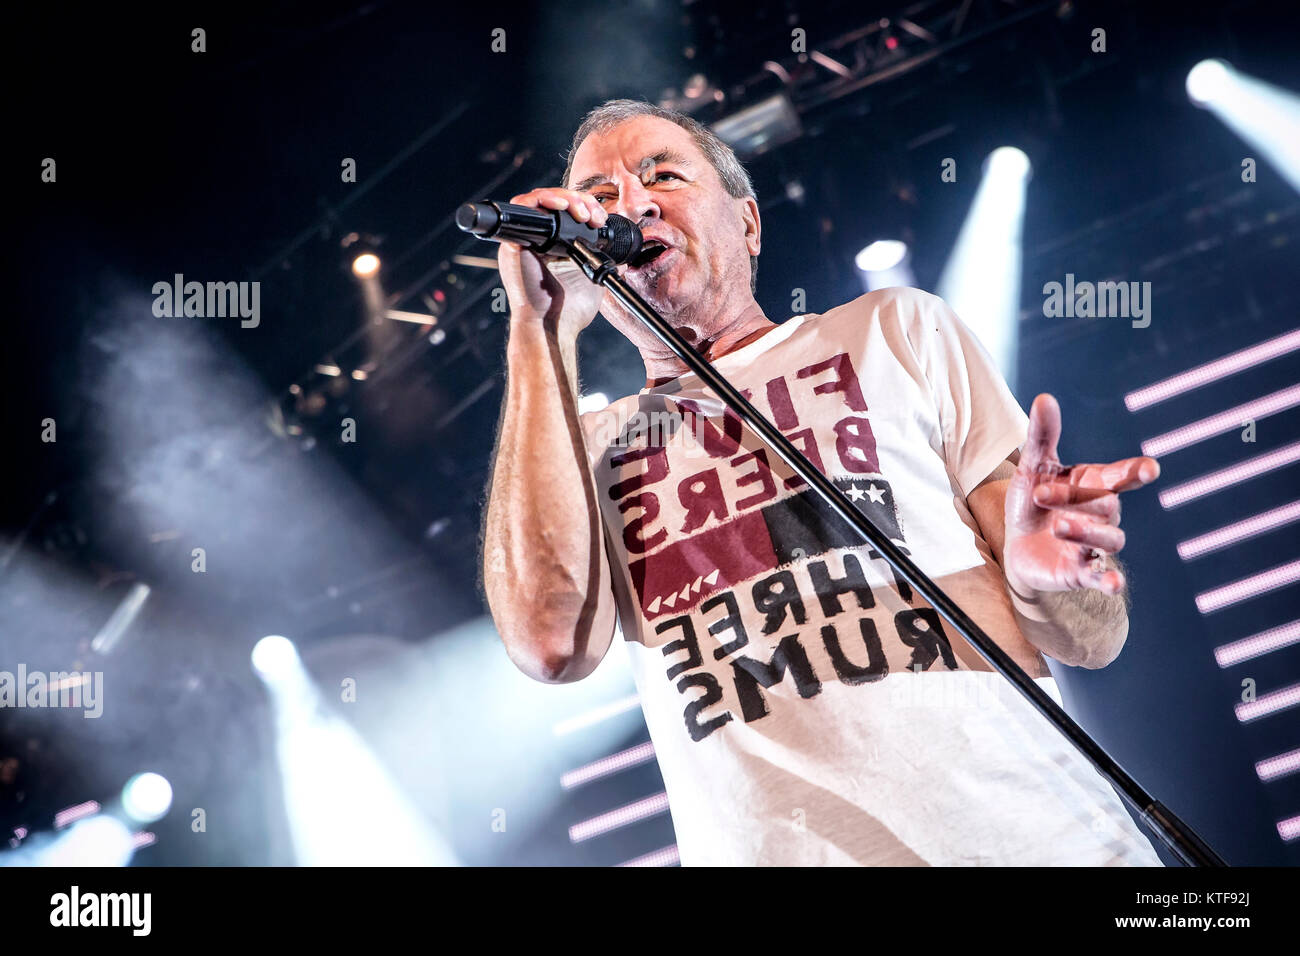 The English rock band Deep Purple performs a live concert at Oslo Spektrum. Here vocalist and songwriter Ian Gillan is seen live on stage. Norway, 04/02 2014. Stock Photo